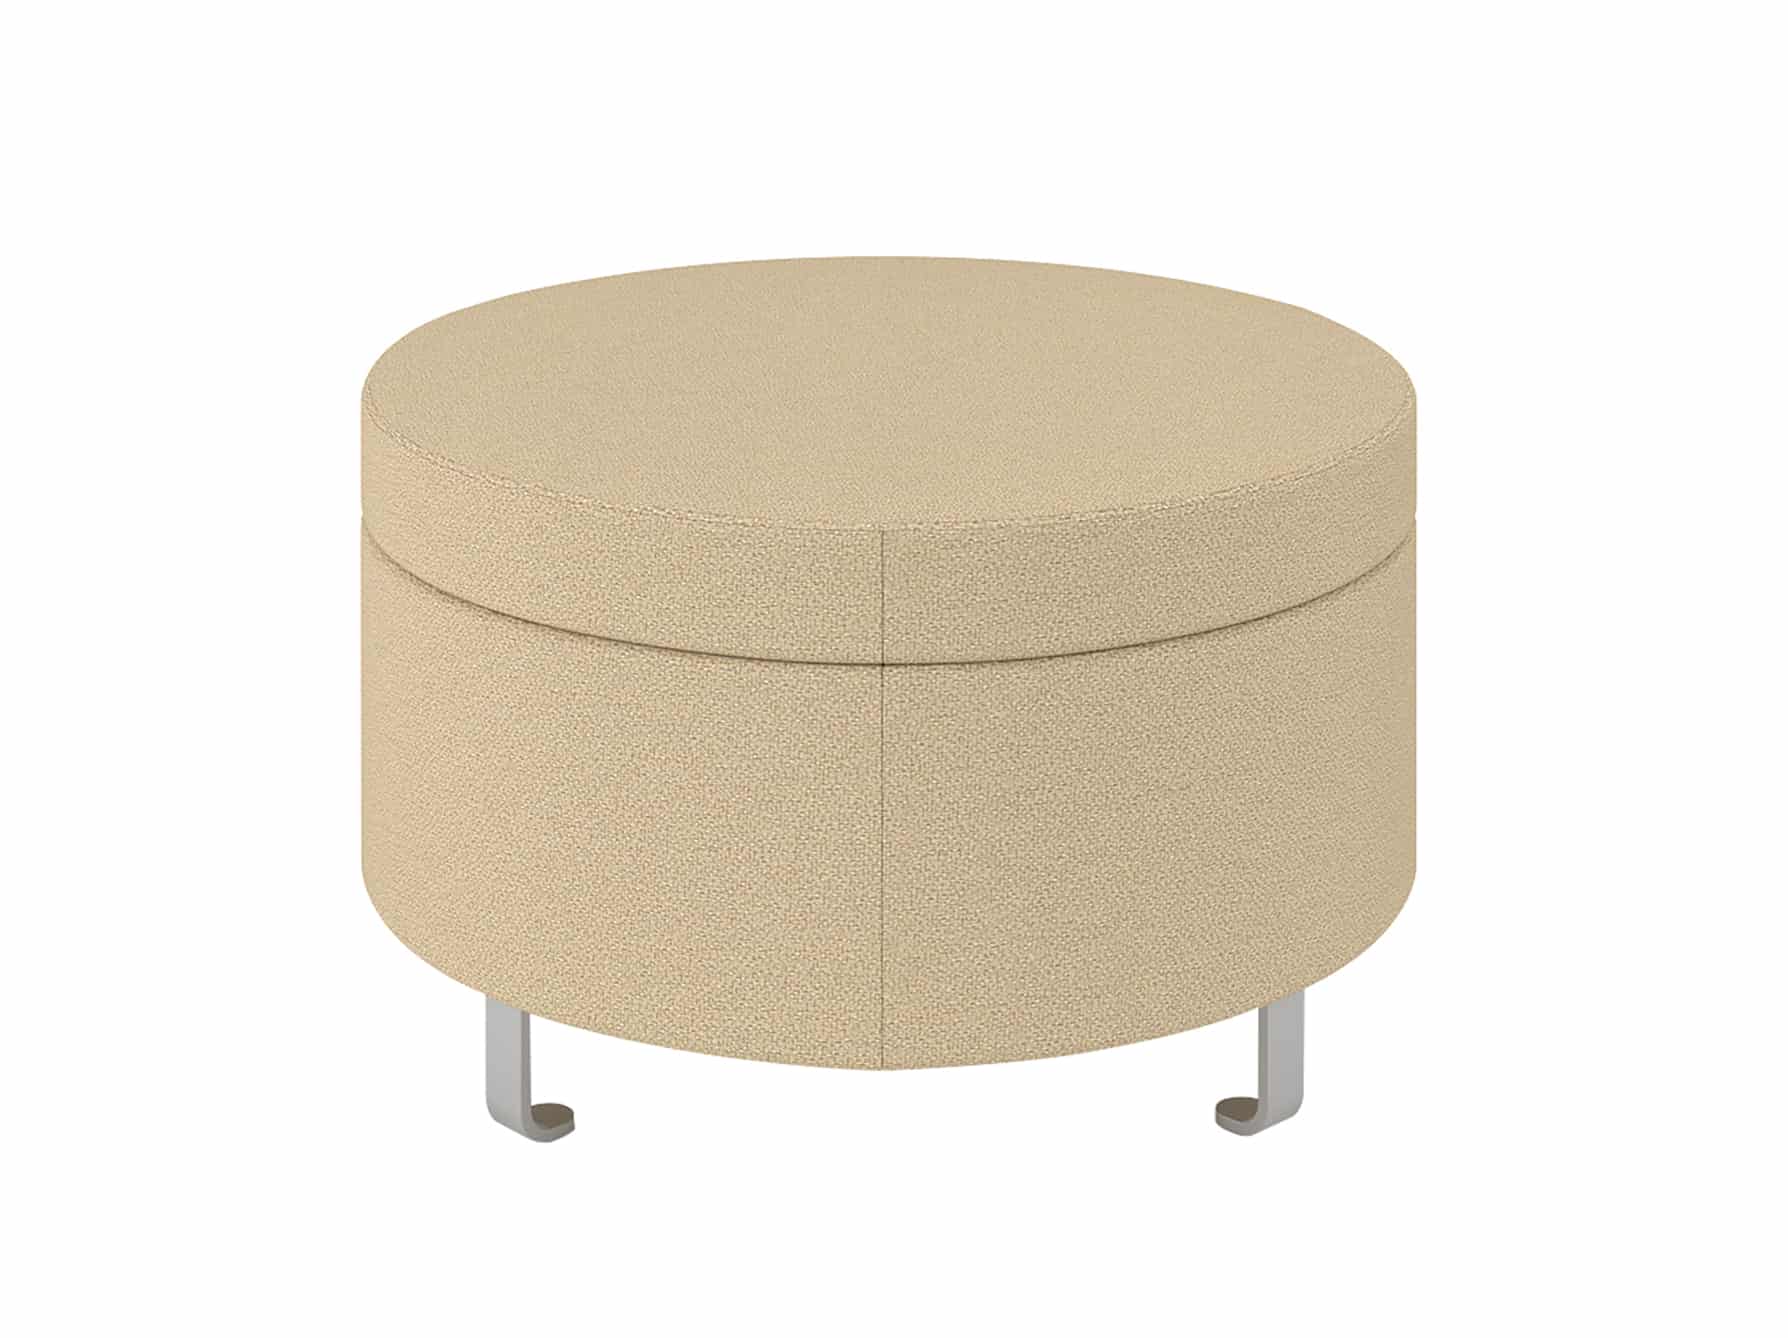 30" Round Ottoman, with Sled Feet